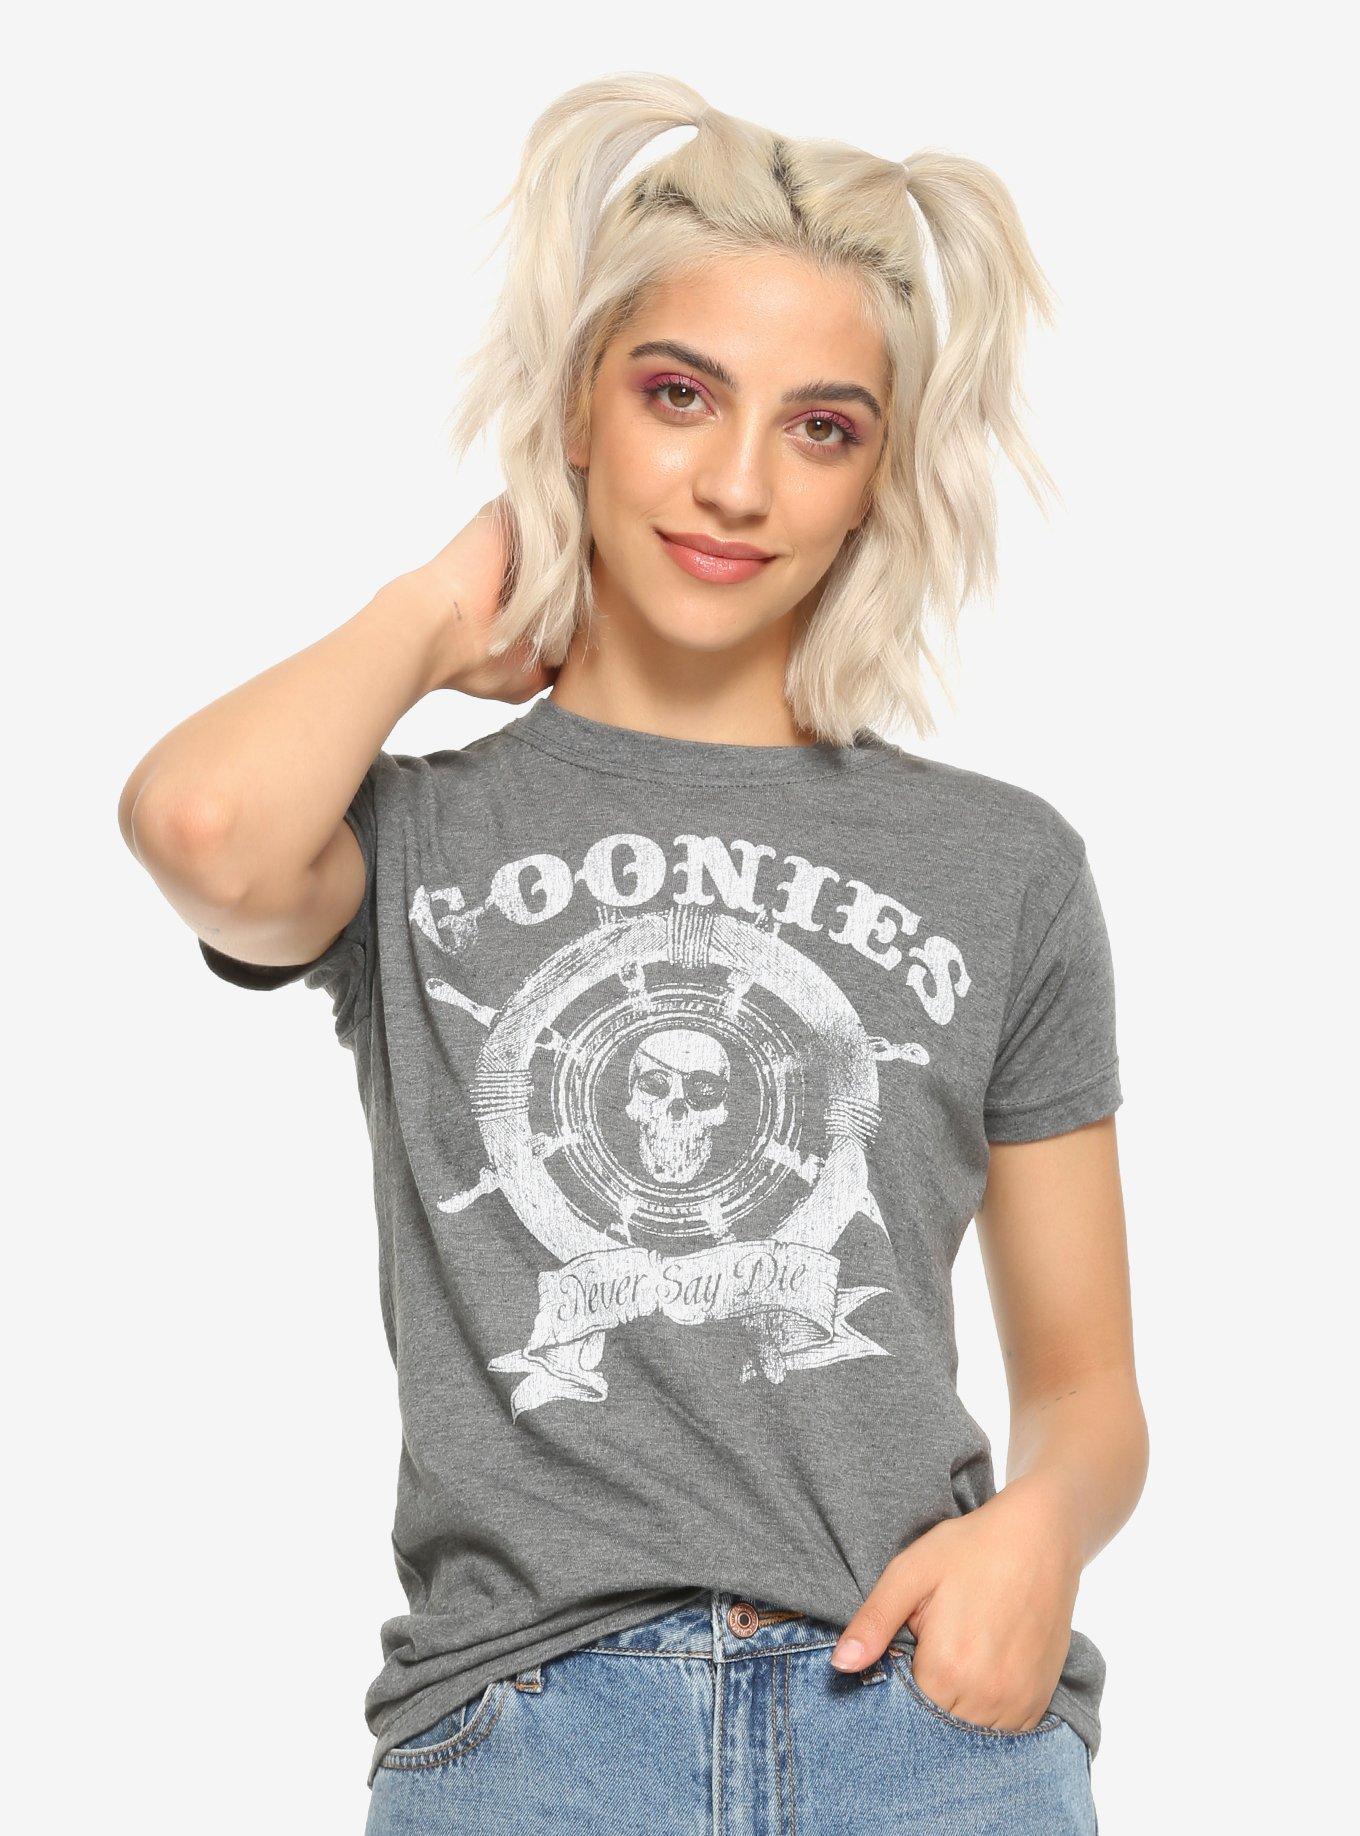 The Goonies Never Say Die Girls T-Shirt | Hot Topic